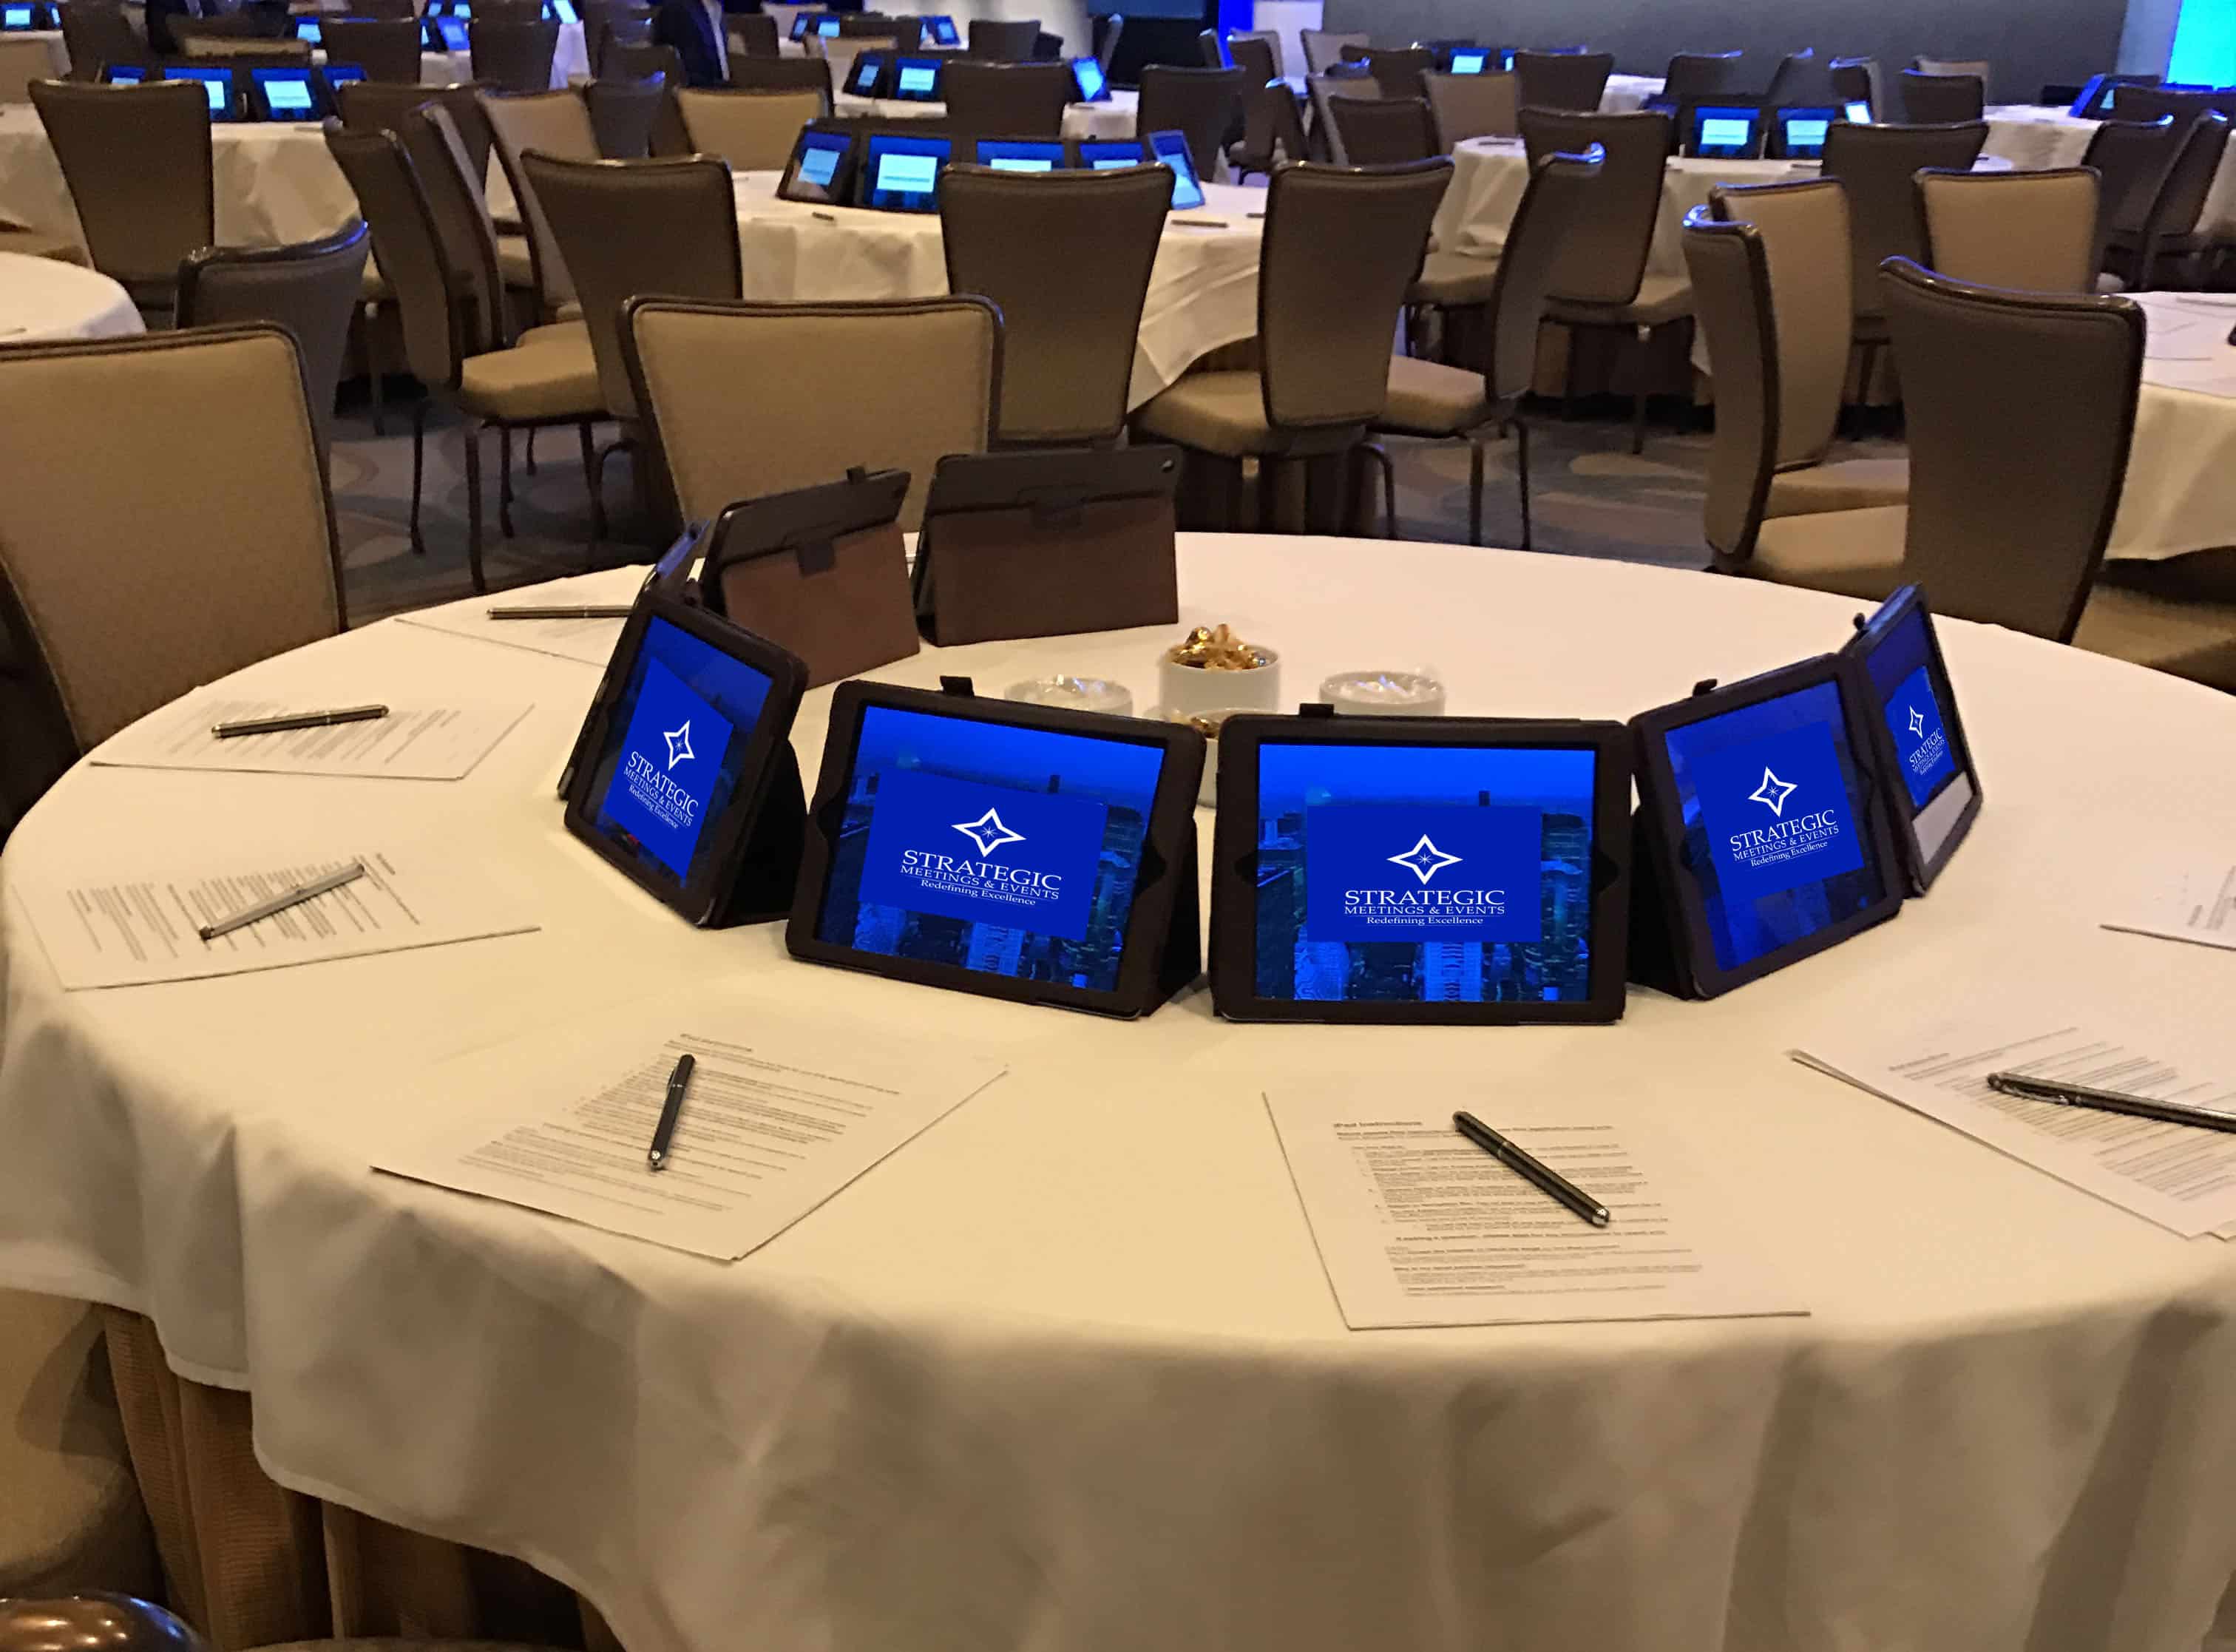 If you want to achieve the holy trinity of savings—time, money, and the environment—it’s time to adopt e-content. Interactive iPads are a natural evolution in the process of going paperless at meetings. Getting Out of a Bind(er): Elevating The Live Meeting Experience